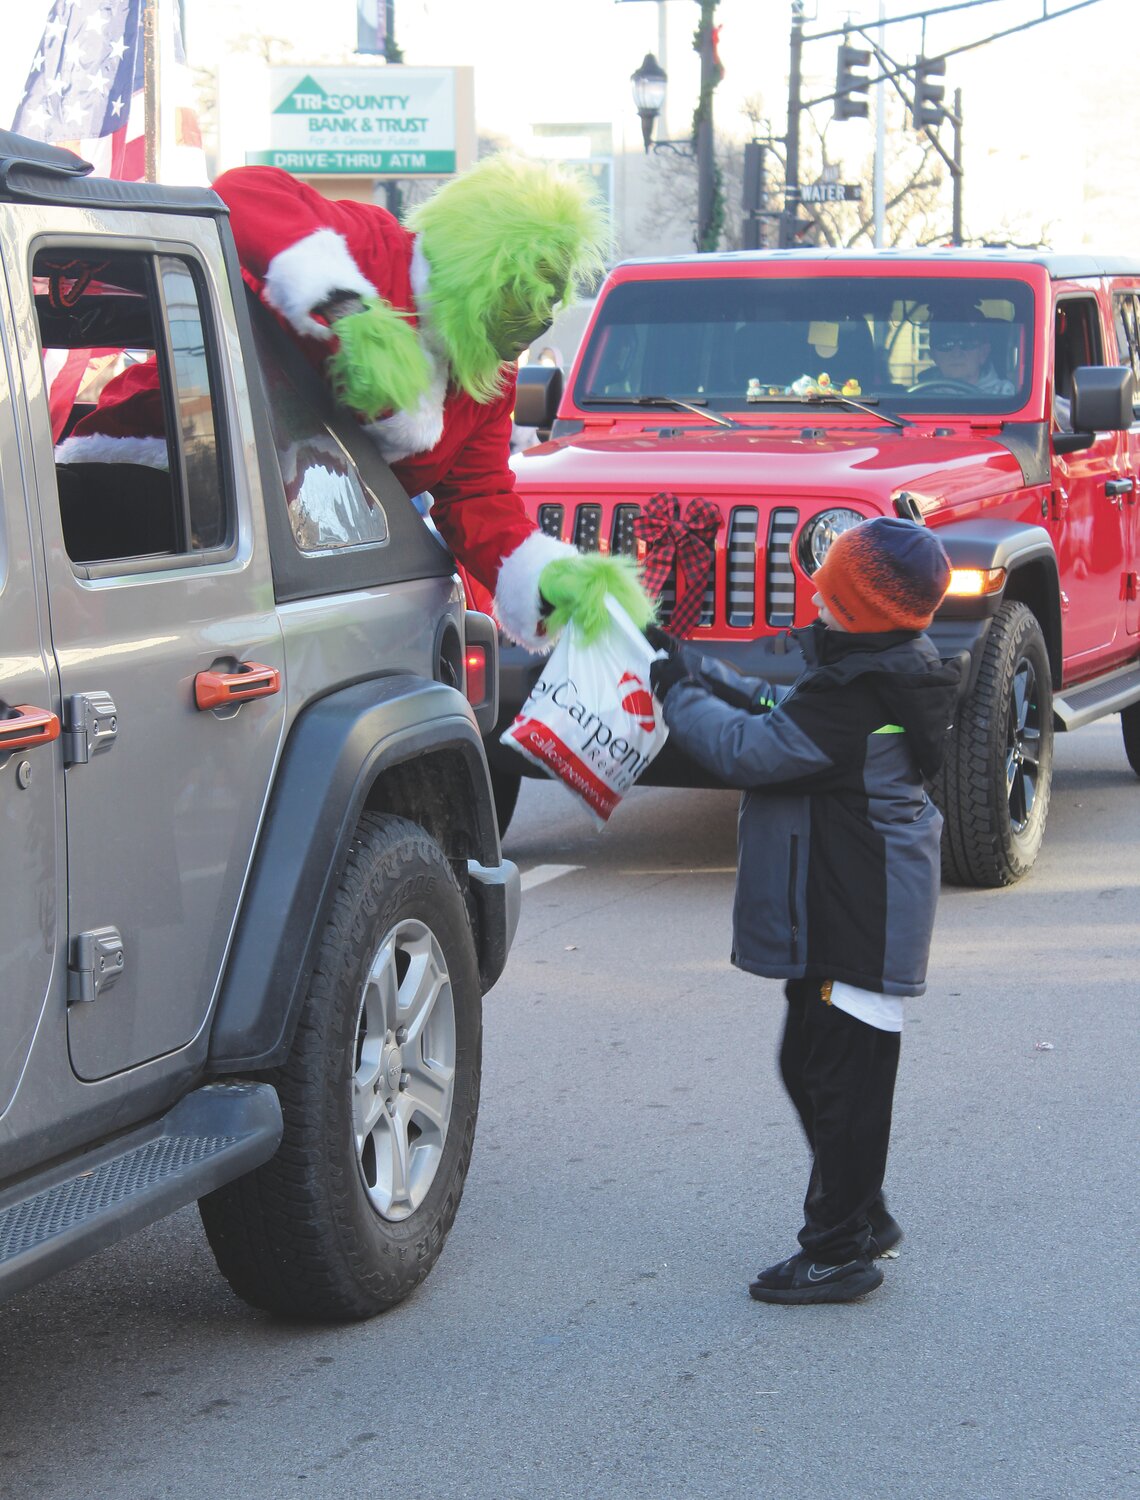 The Grinch makes a grab at a boy’s candy bag, but was unsuccessful in snatching the treats.